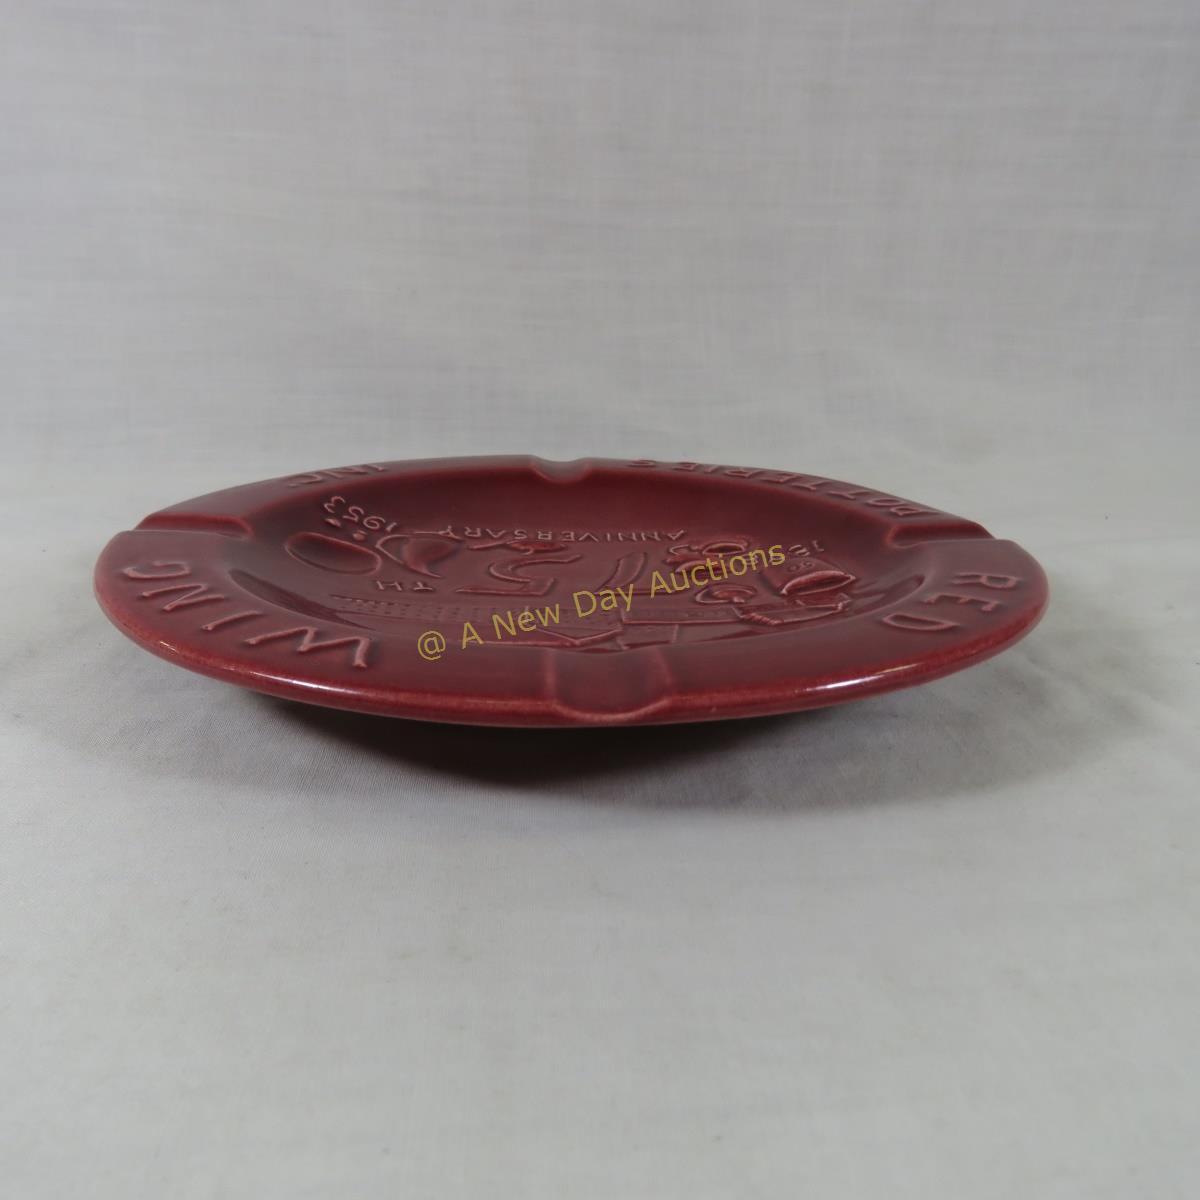 2 Red Wing commemorative ashtrays and Trivet